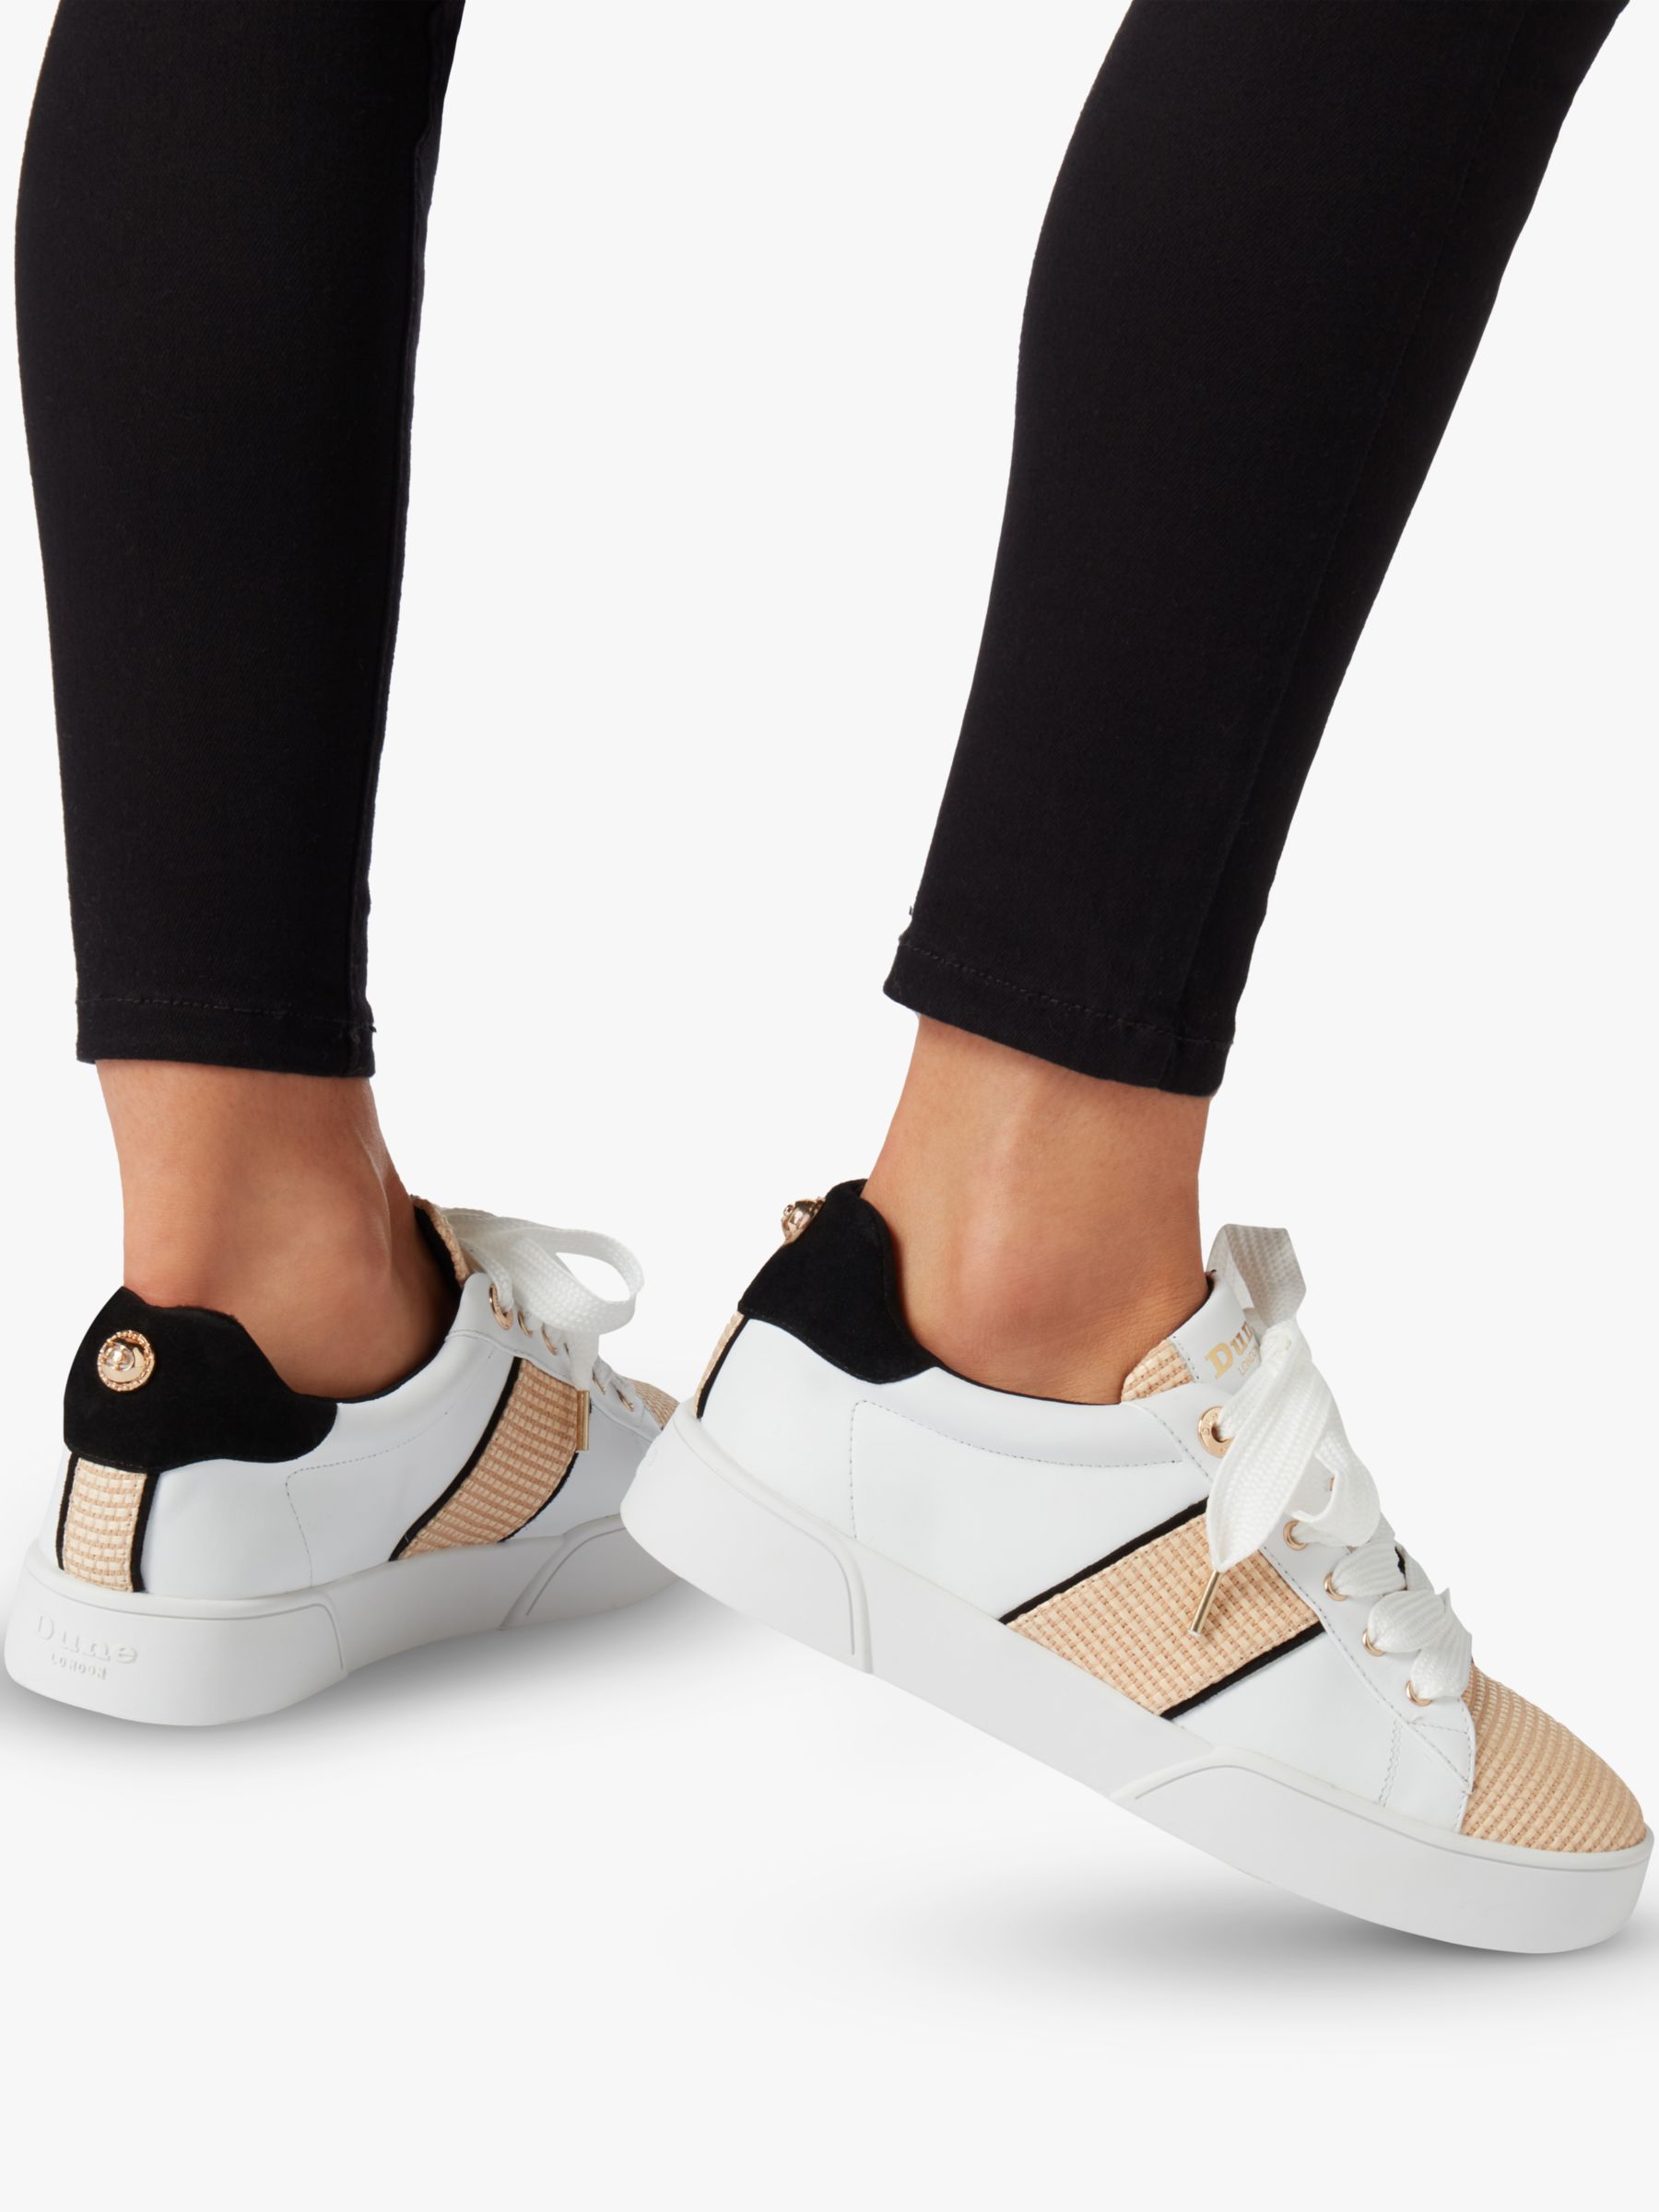 dune elsie lace up trainers